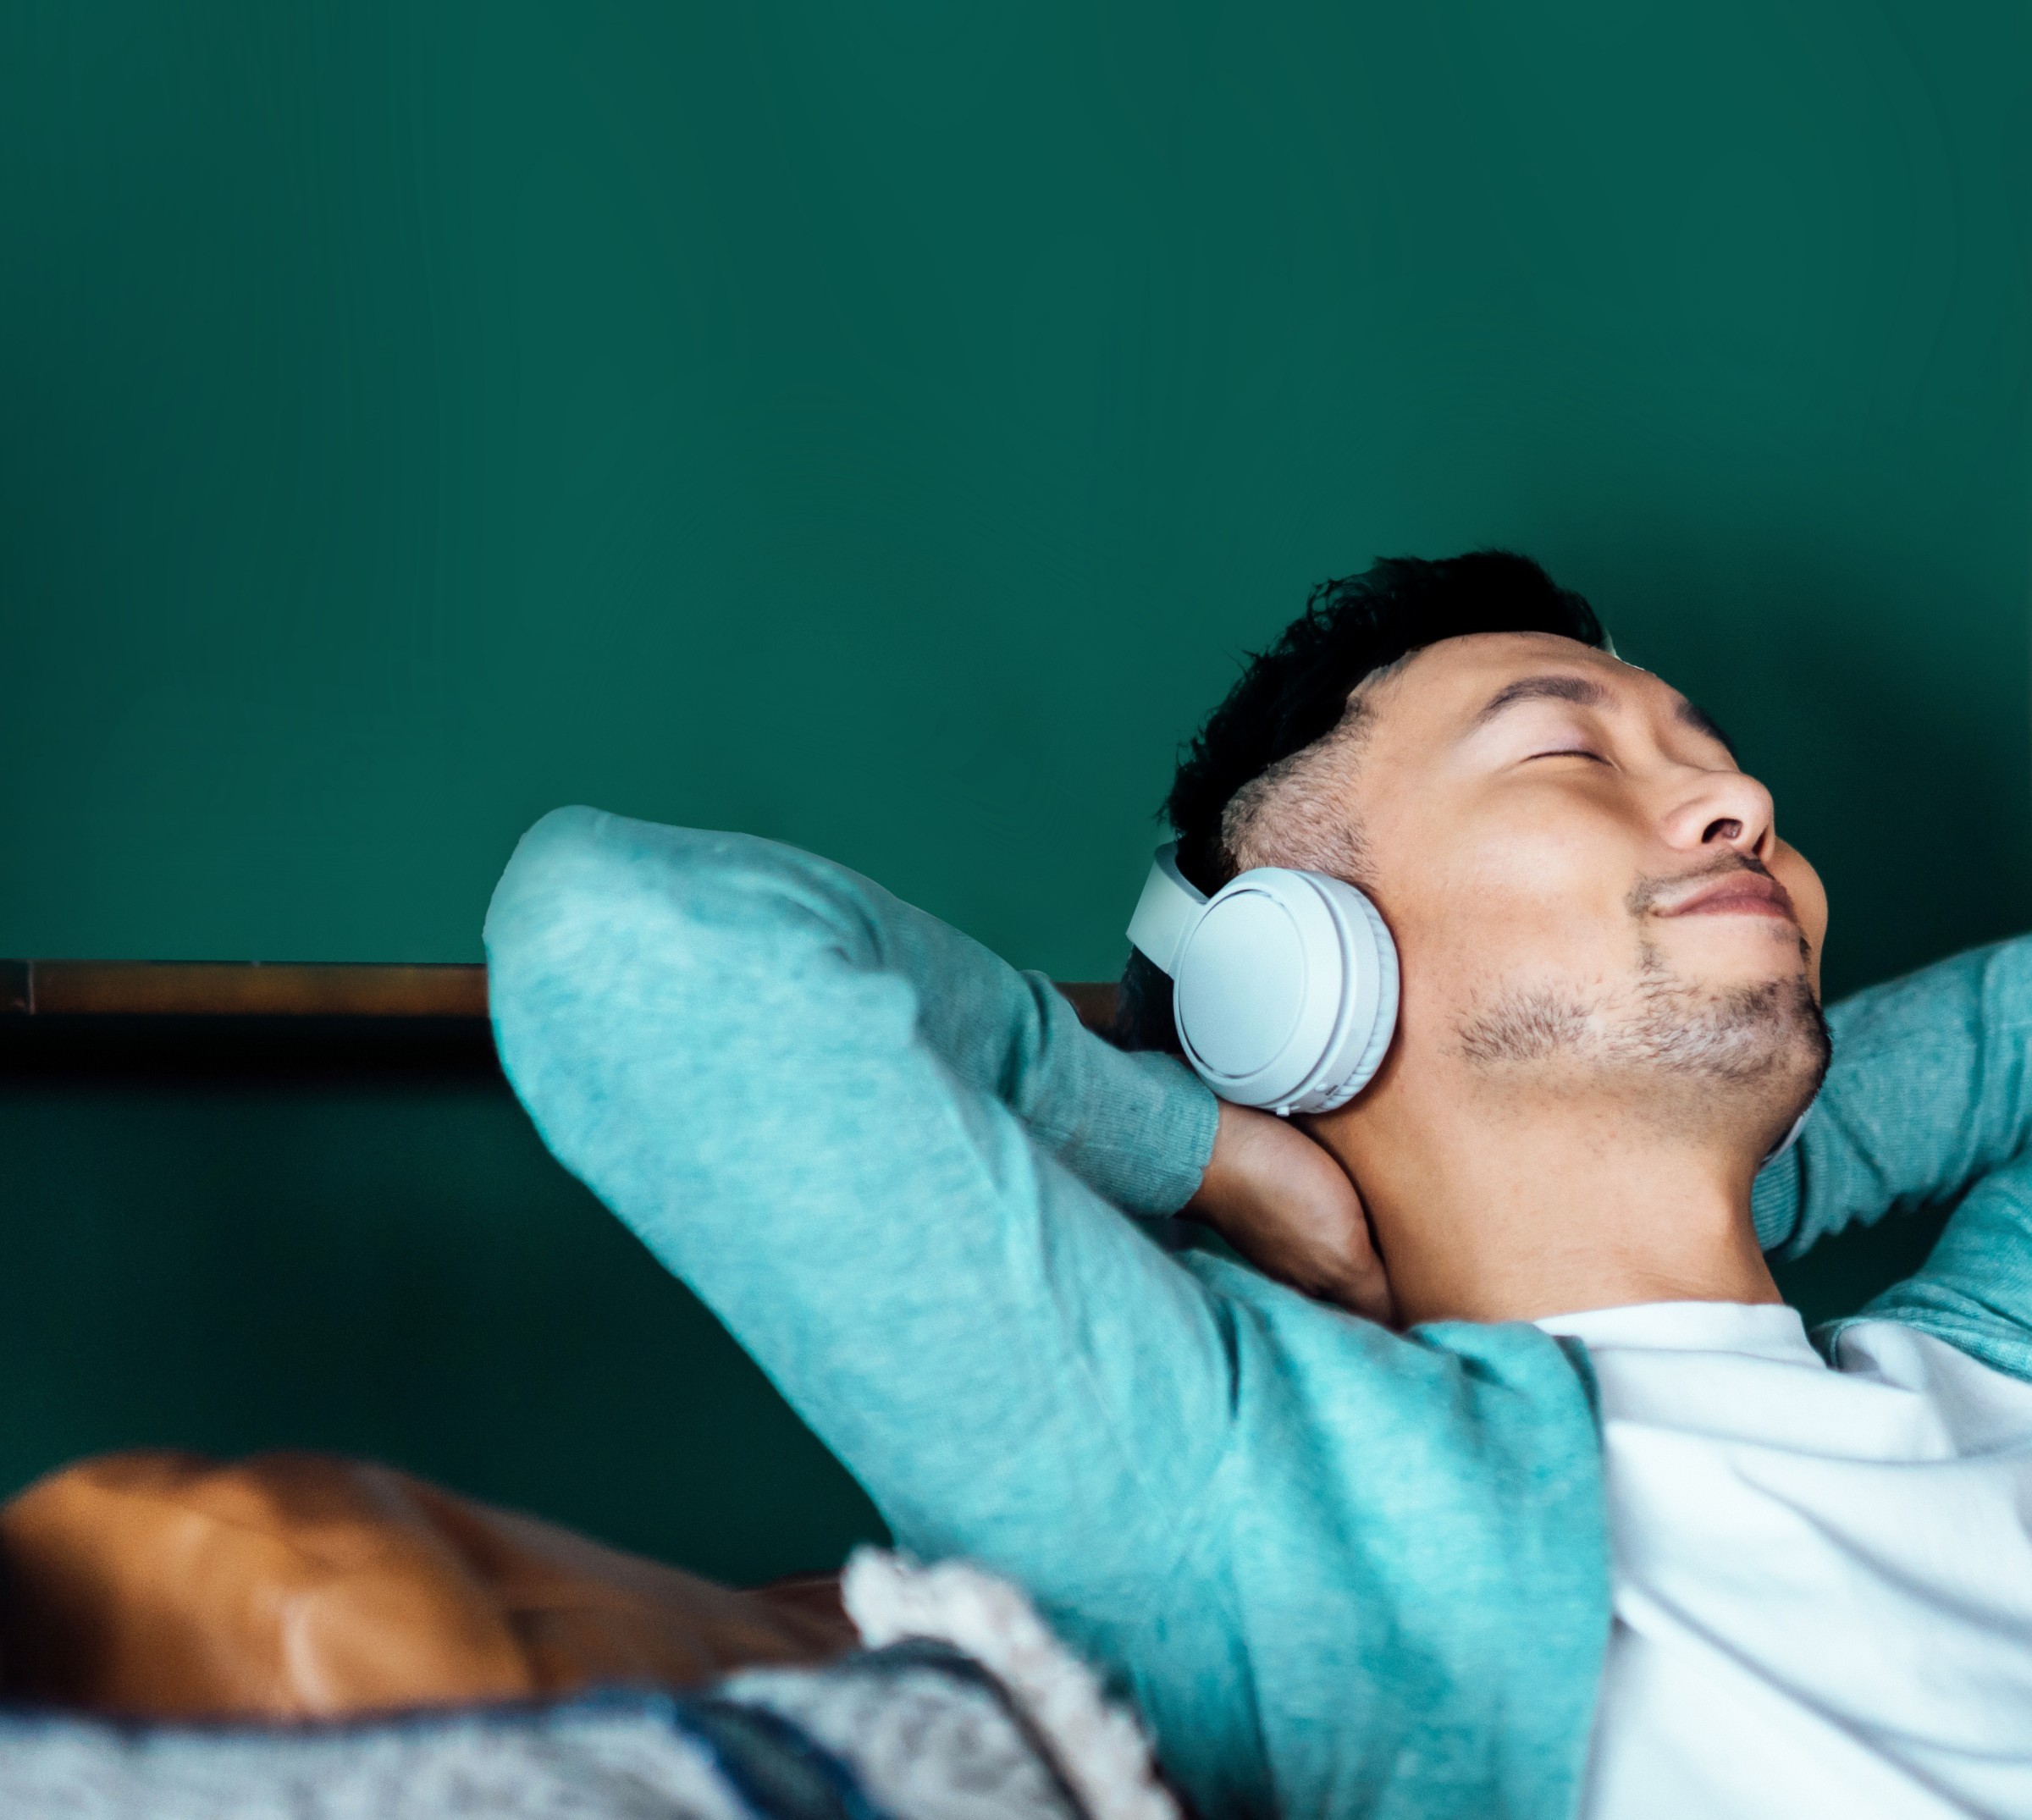 Man with headphones on couch